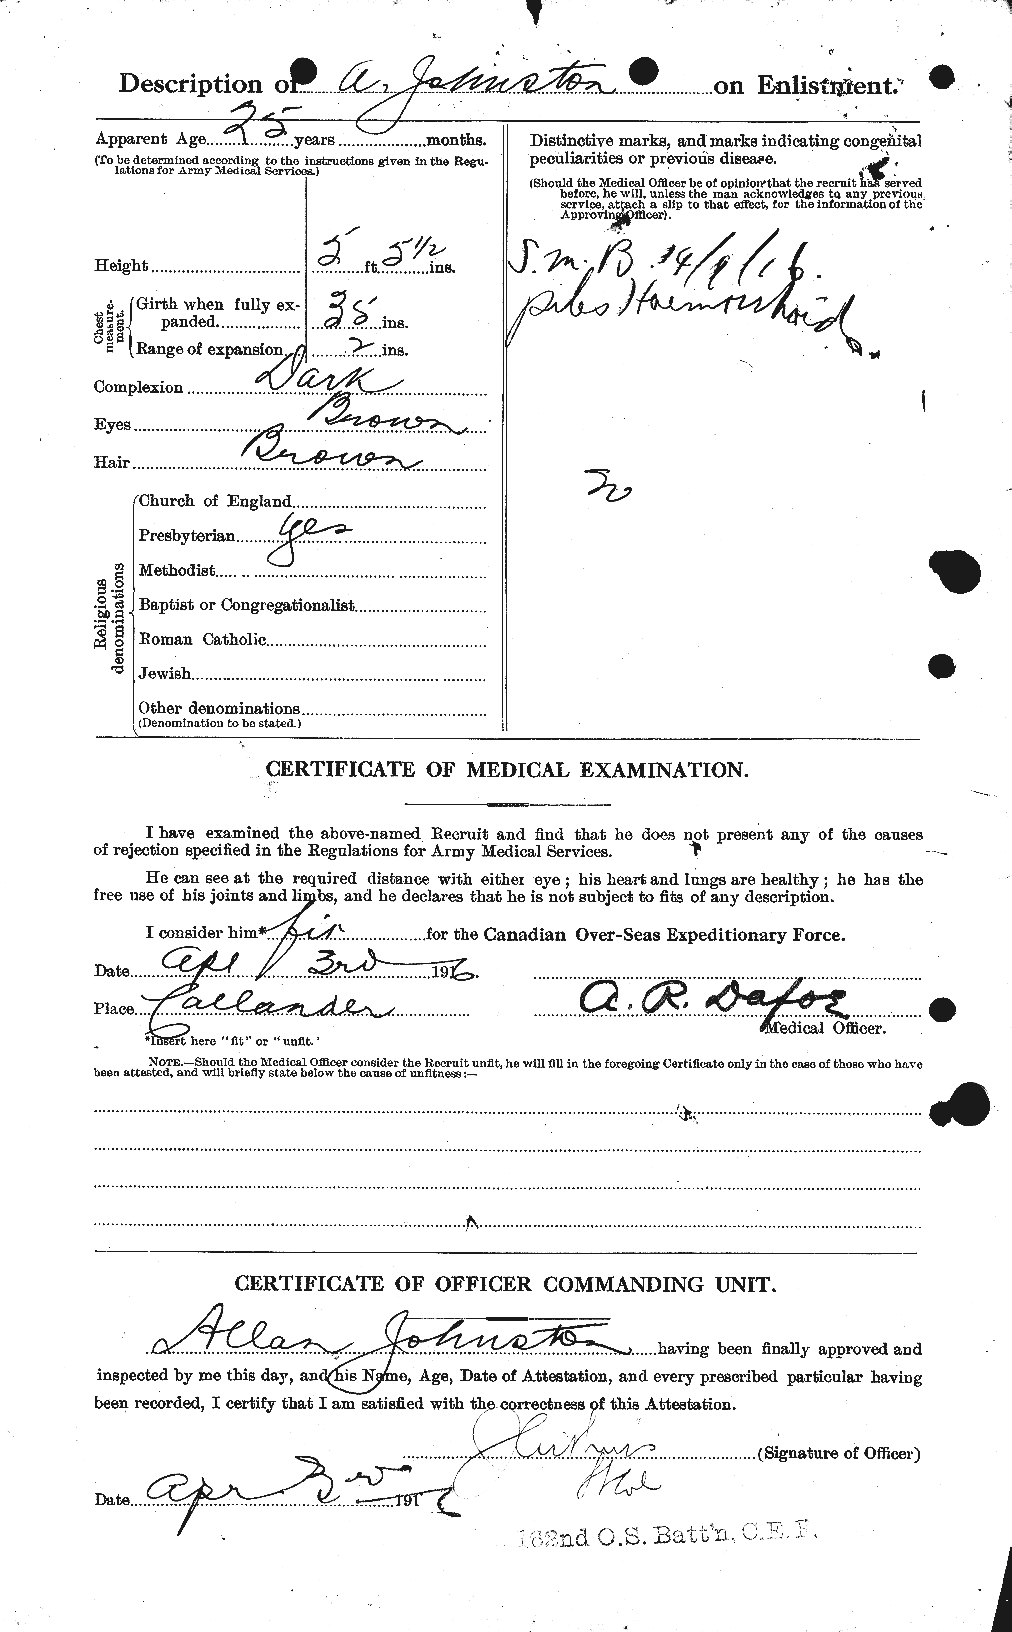 Personnel Records of the First World War - CEF 420997b